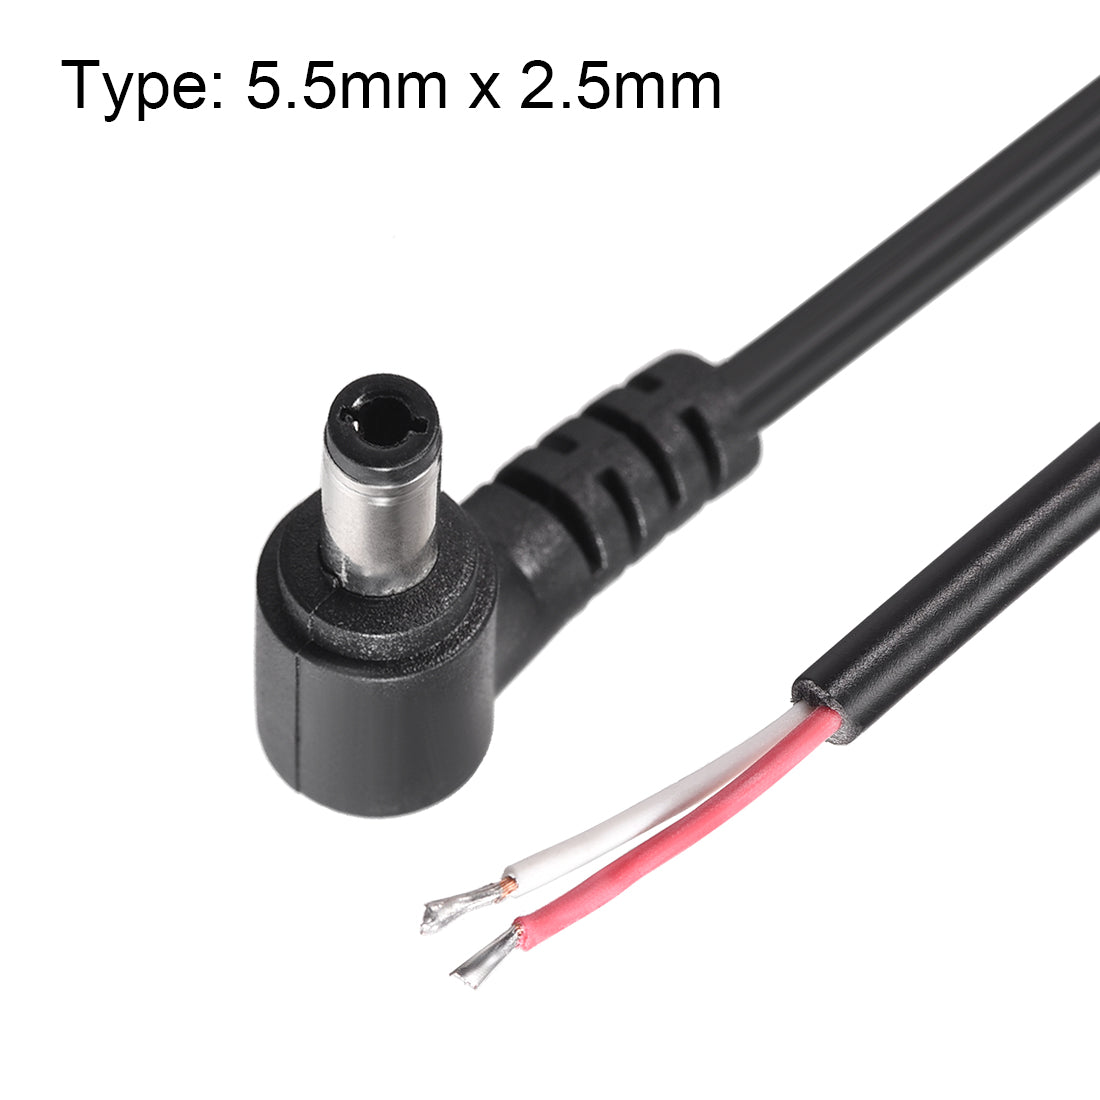 uxcell Uxcell DC Power 5.5mm x 2.5mm 4A 30cm Male Plug Right Angle Cord Cable Connector